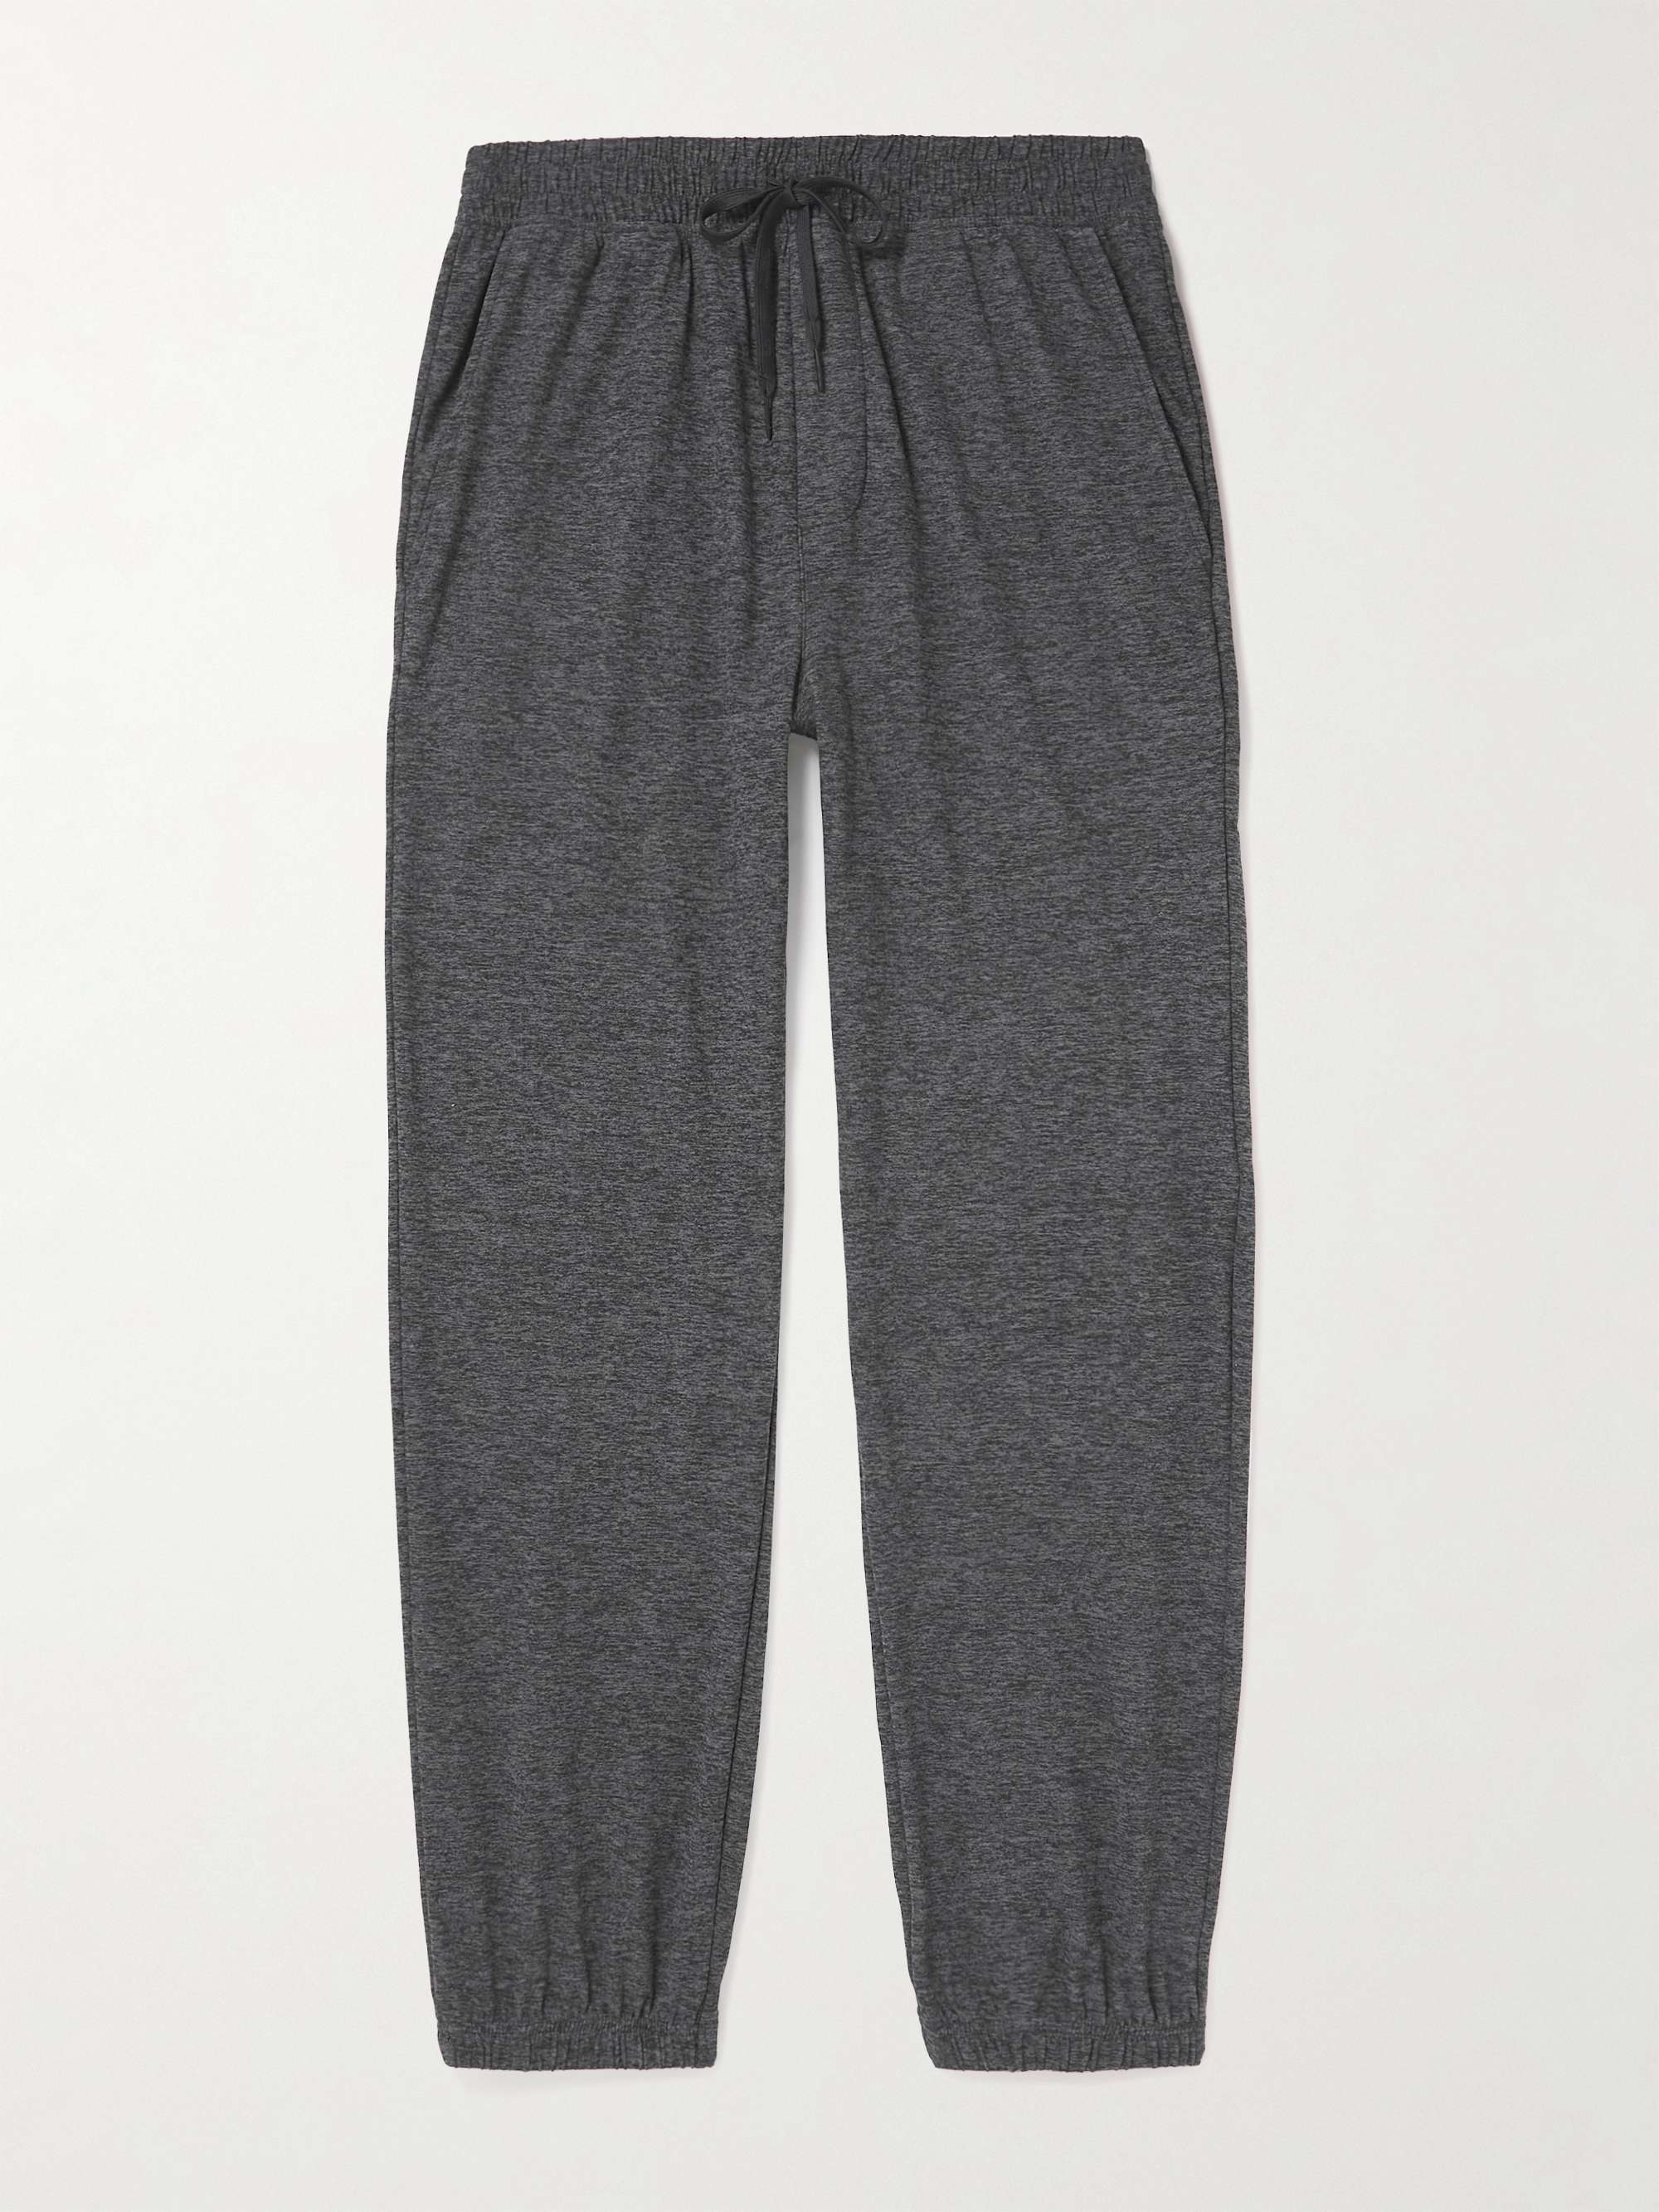 OUTDOOR VOICES Tapered CloudKnit Sweatpants